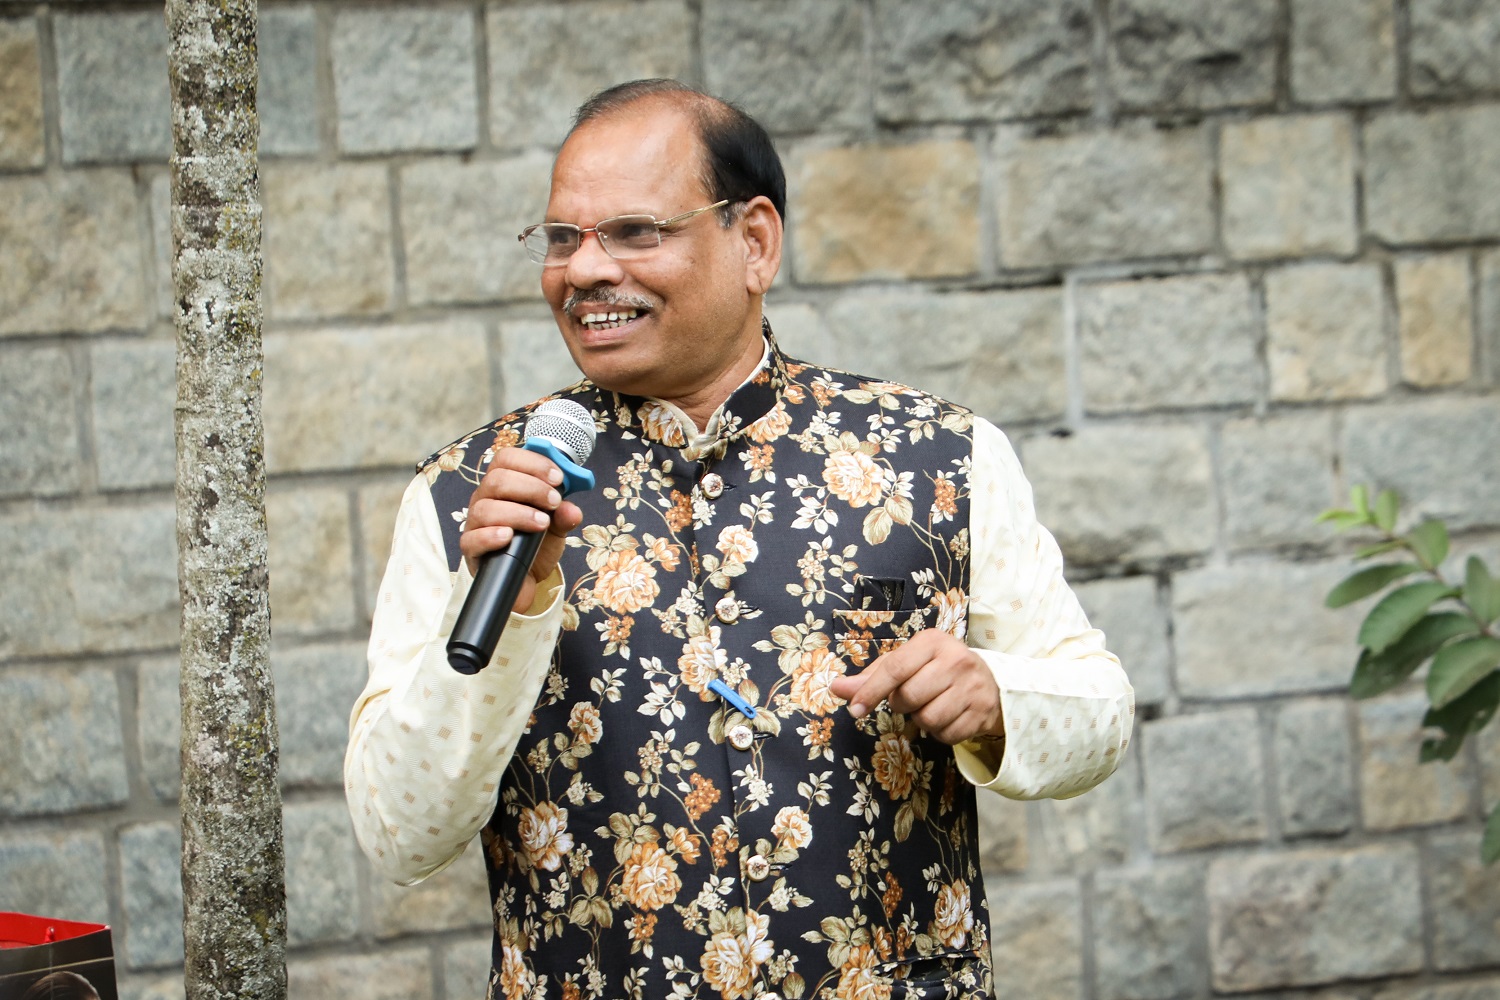 After 39 years on campus, Mr. Gopala Sherigara says if there is something called next birth, he would love to be born as a nightingale on the beautiful campus of IIMB. He was speaking at the retirement function organized by the institute for him on 31st October 2022.